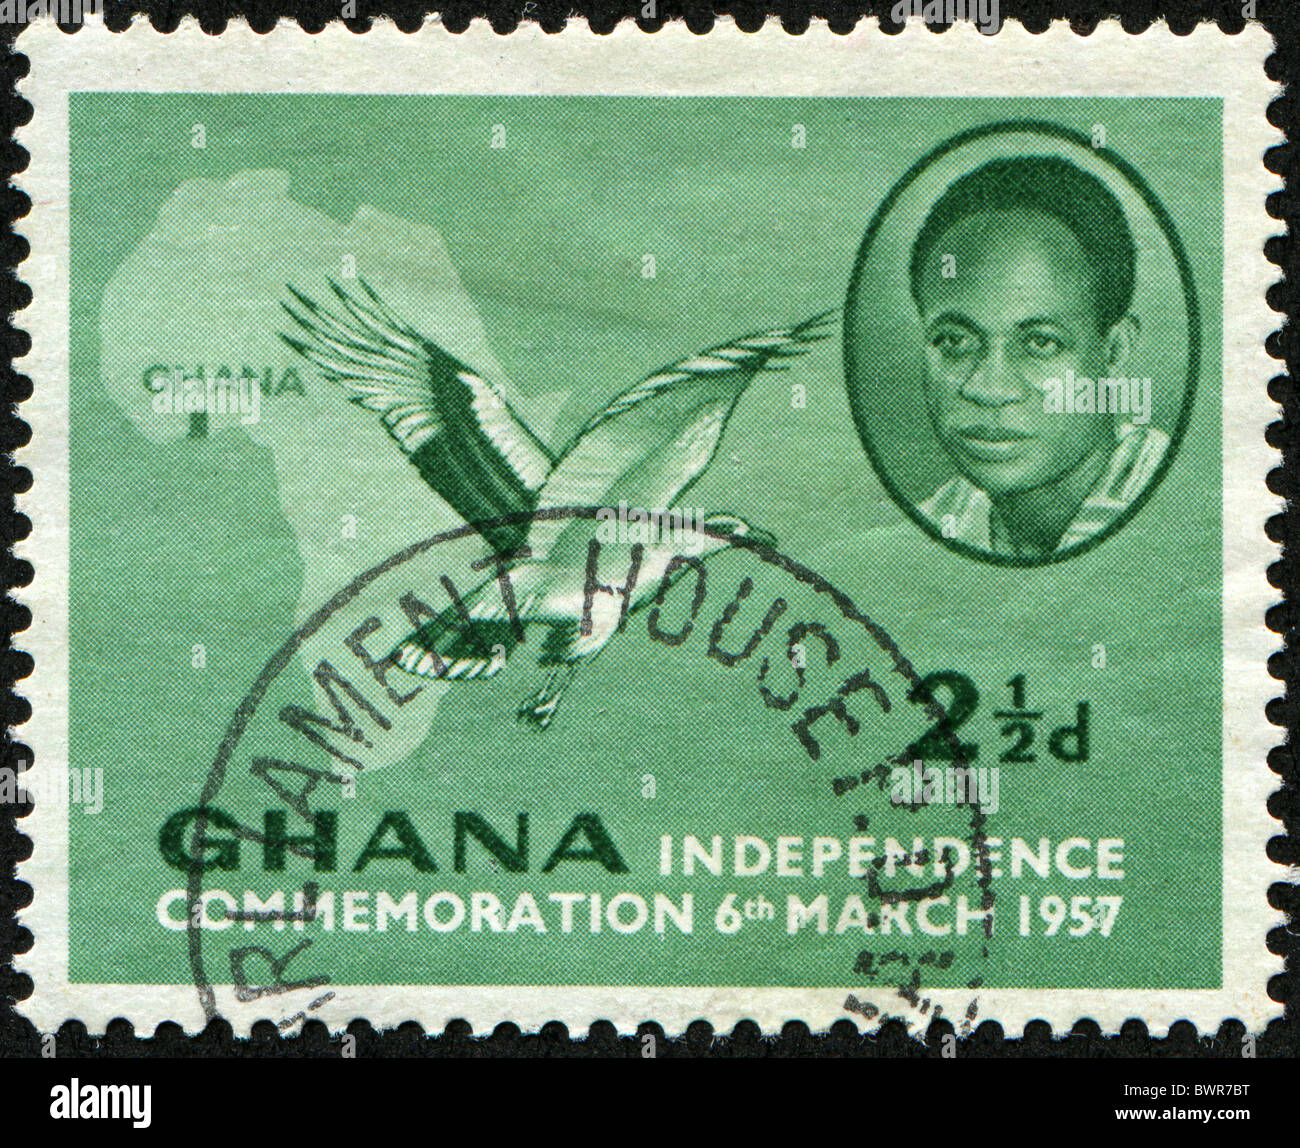 map of Africa and commemorates Ghanaian independence Stock Photo